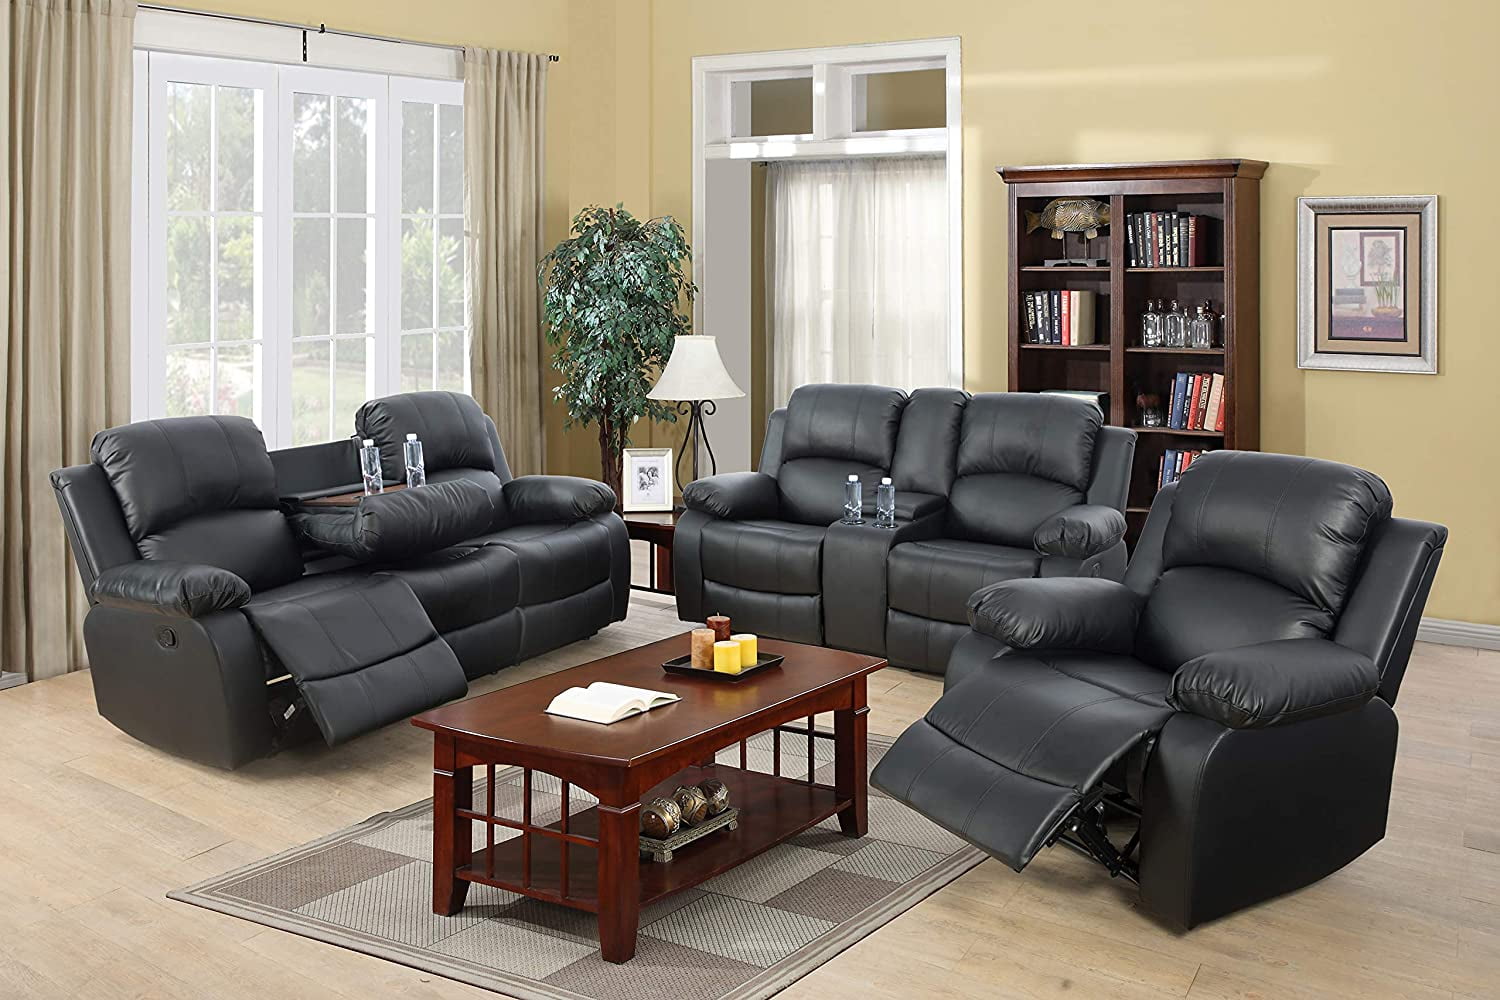 Pieces Living Room Reclining Sofa Set, Modern Leather Recliner Sofa And Loveseat Set